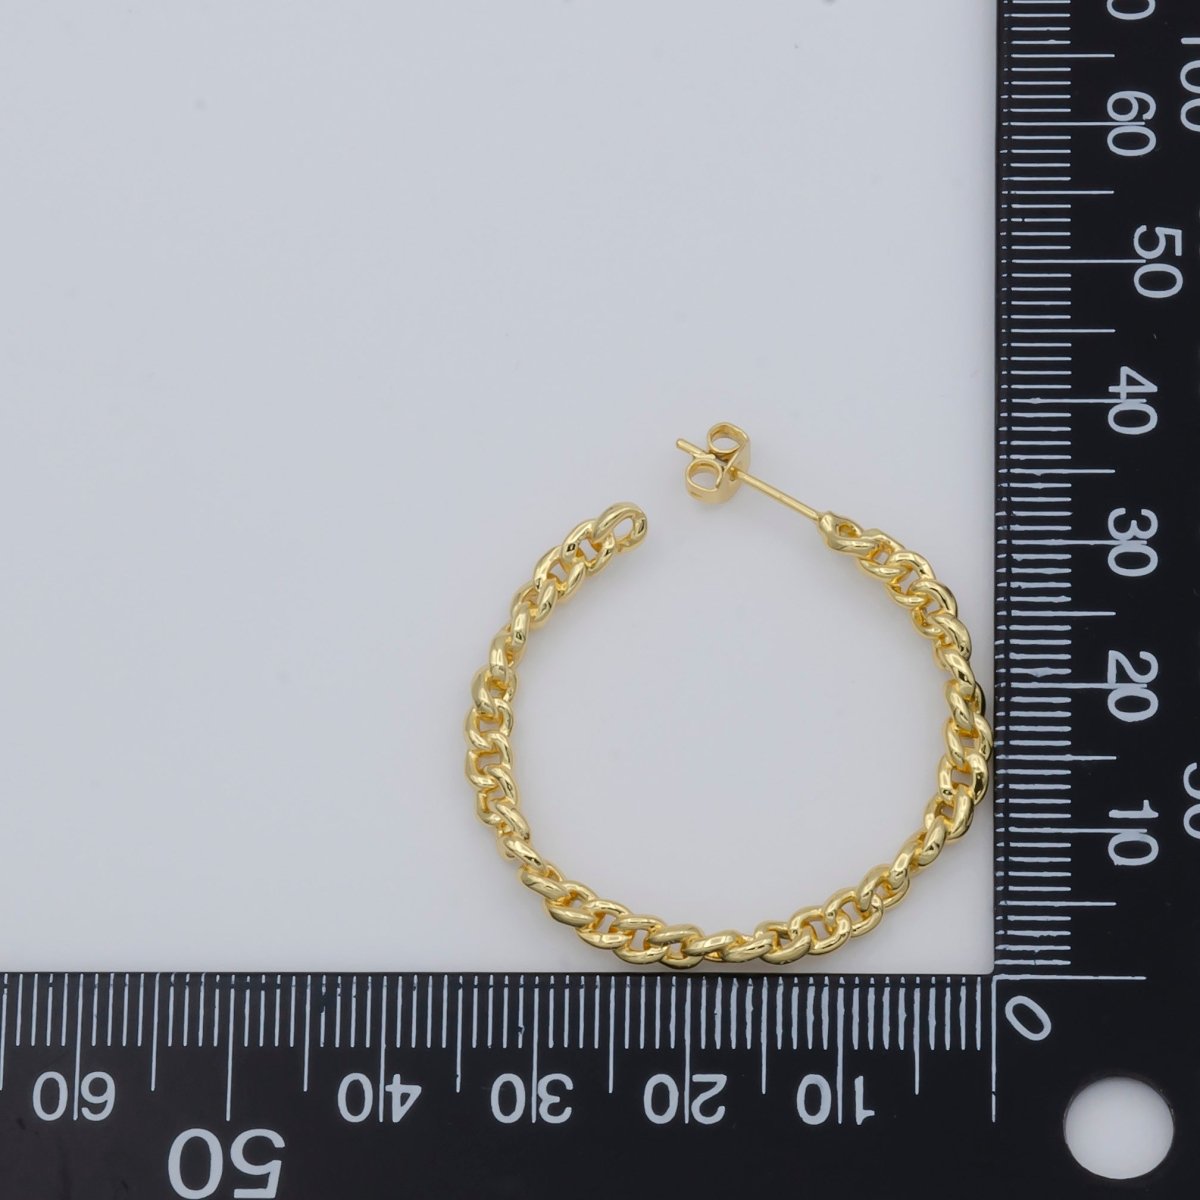 Simple Golden Chained Round Ring Huggies Earrings, Plain Gold Filled Tiny Geometric Formal/Casual Daily Earring Jewelry P-113 - DLUXCA